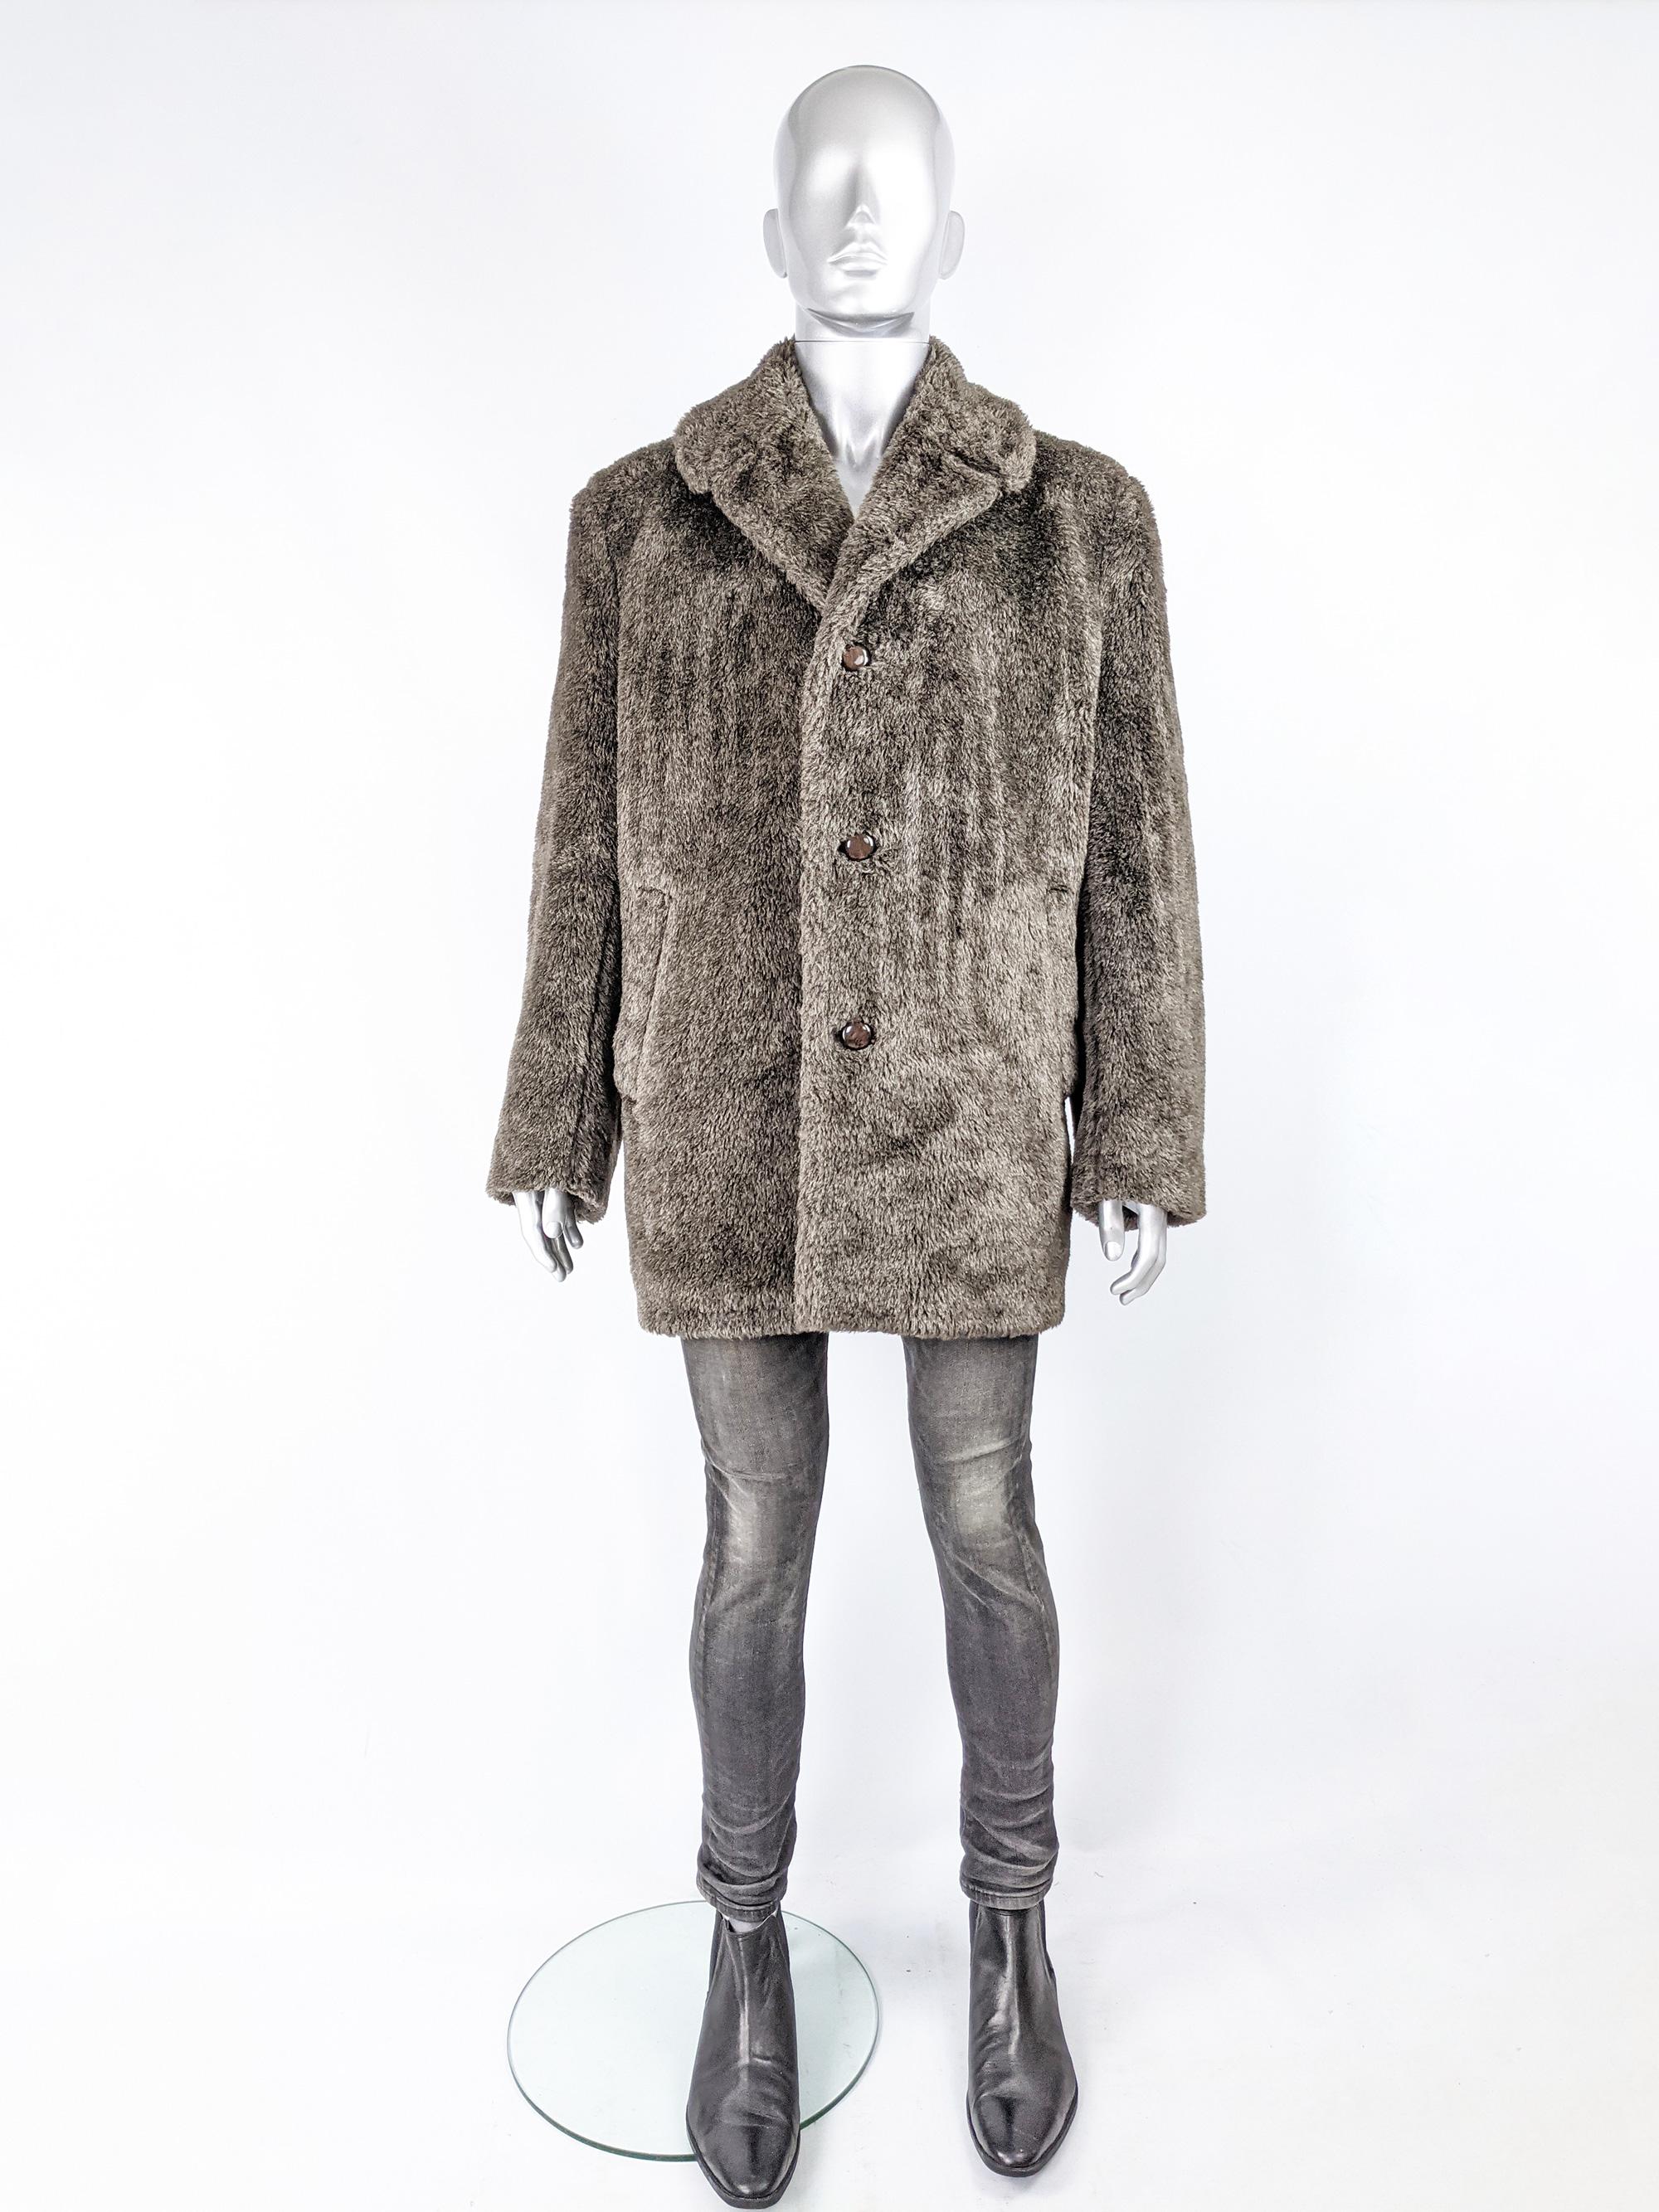 An absolutely amazing and super rare vintage mens faux fur coat from the 70s by Baronia. In a soft, brown faux fur, it is really hard to find original men's faux fur coats from the seventies, a real treasure! 

Size: Unlabelled; fits like a men's XL